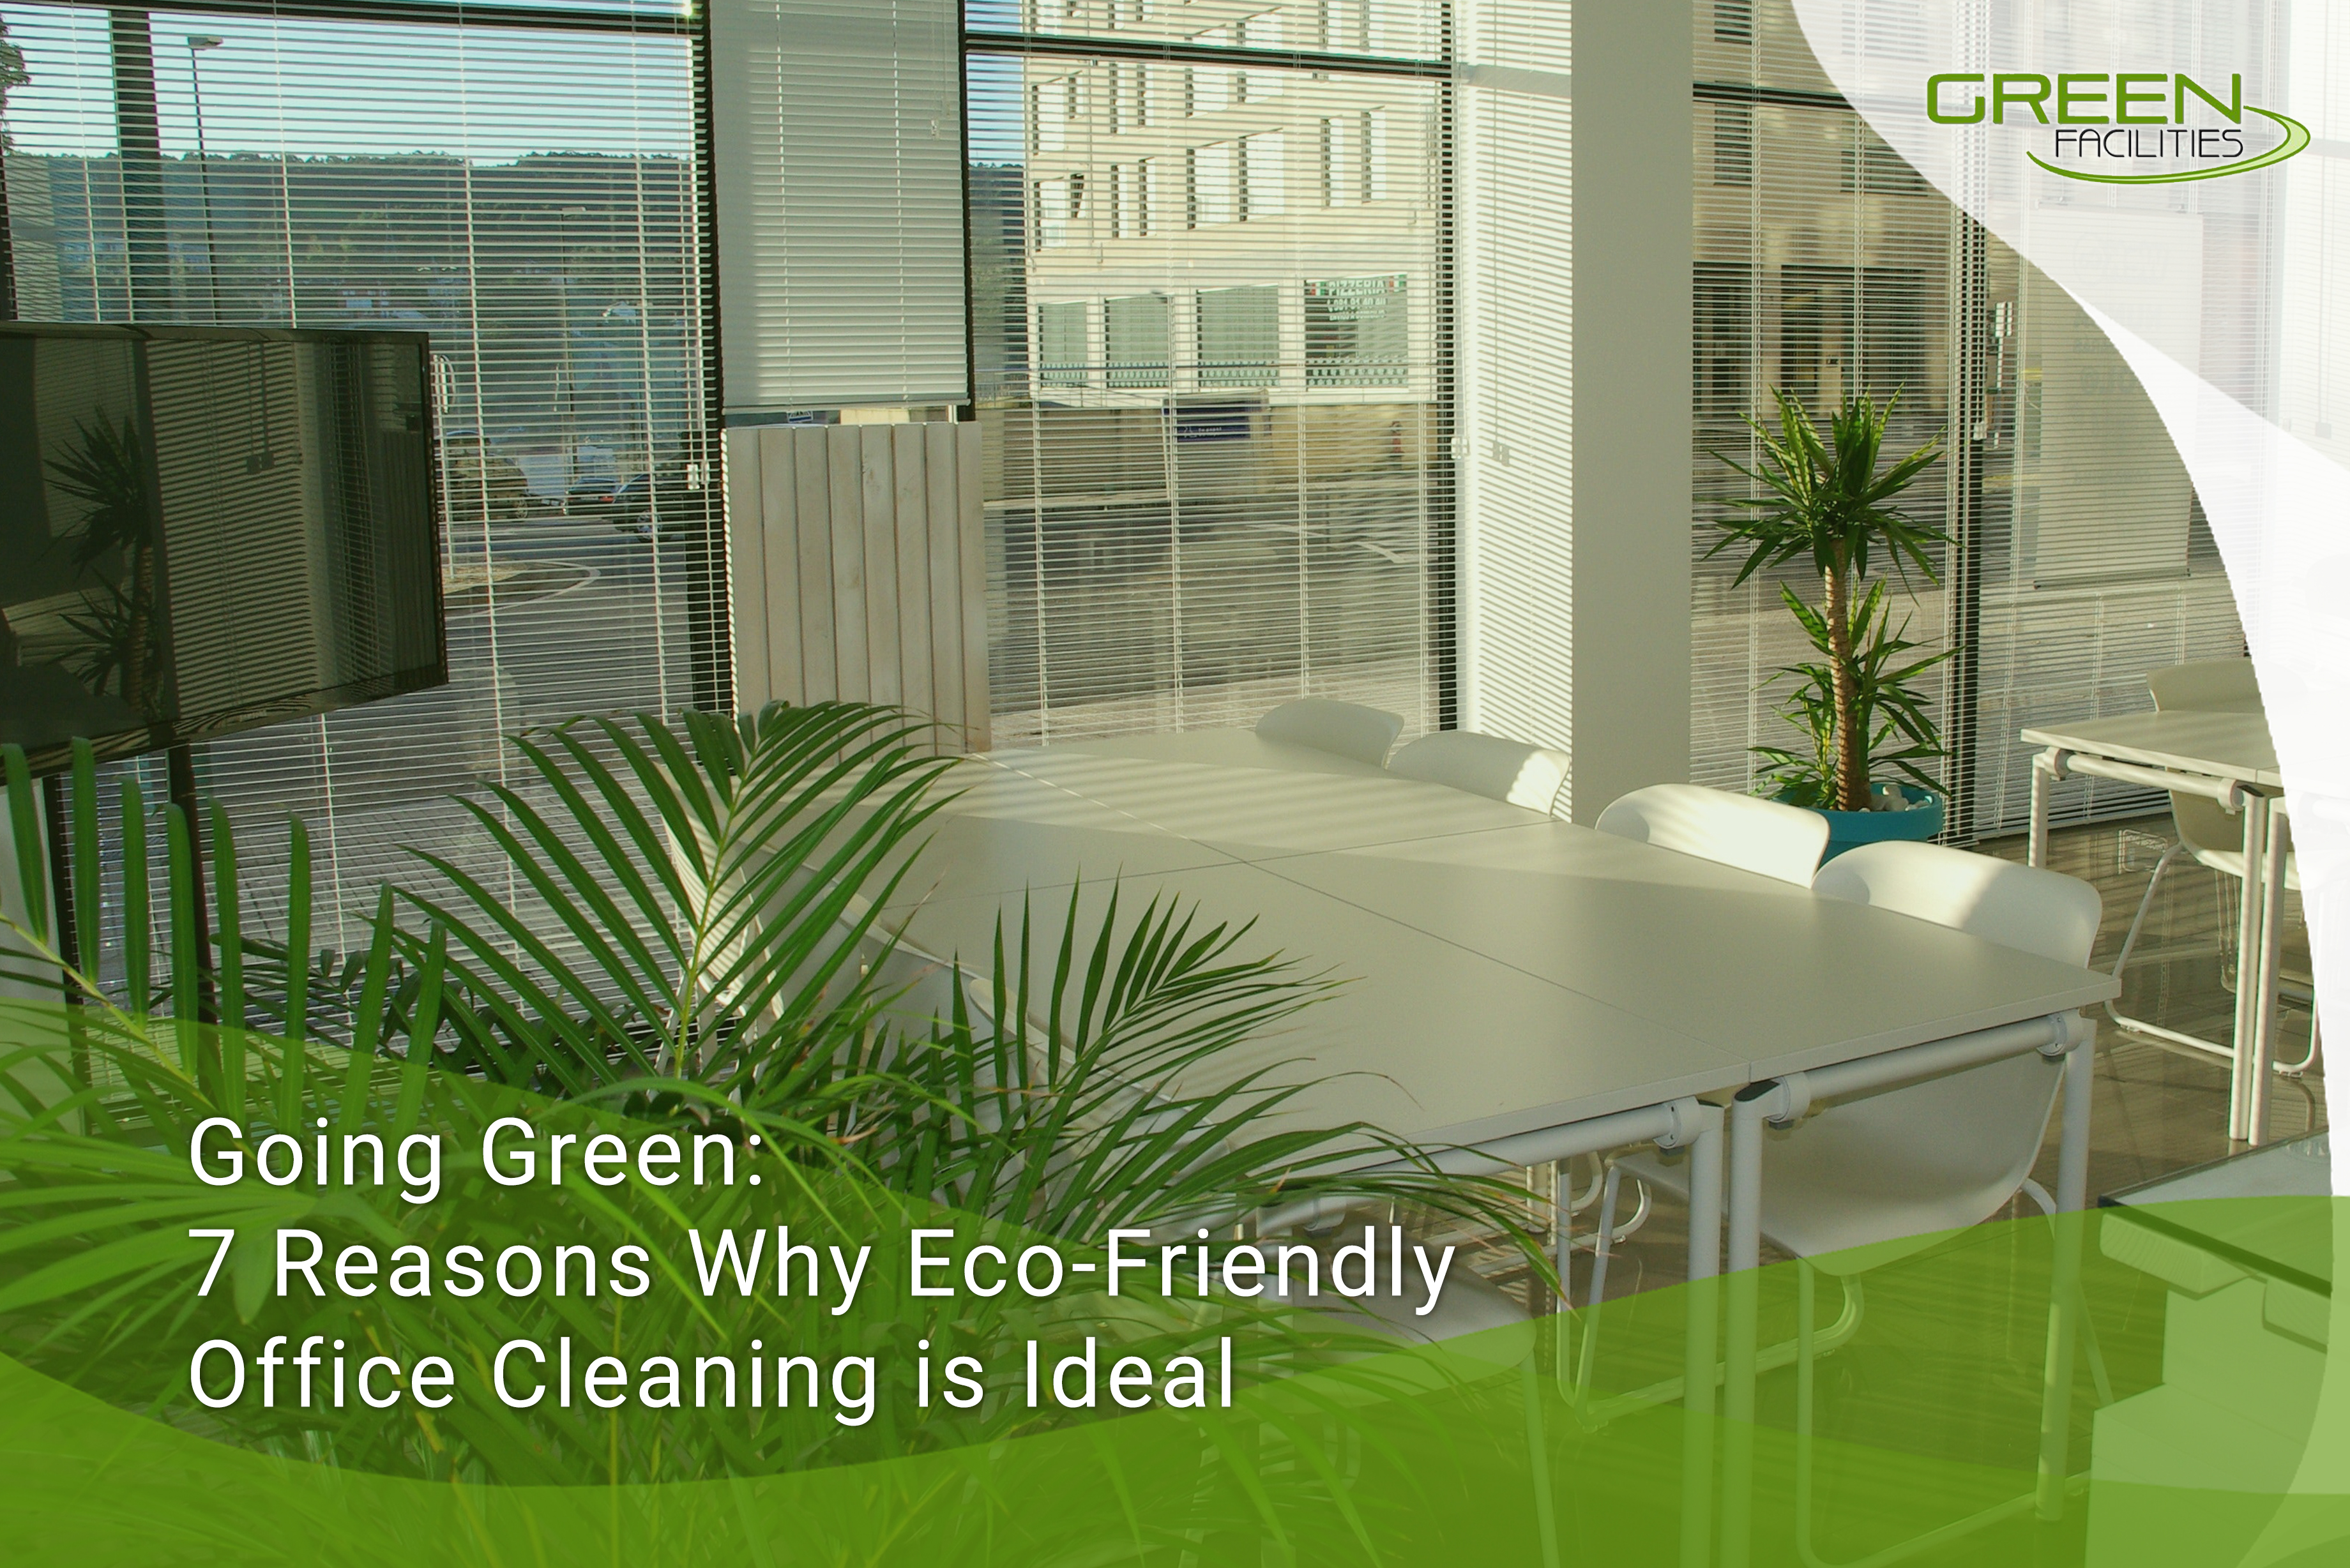 Eco-Friendly Office Cleaning: 7 Reasons Why Going Green Is Best